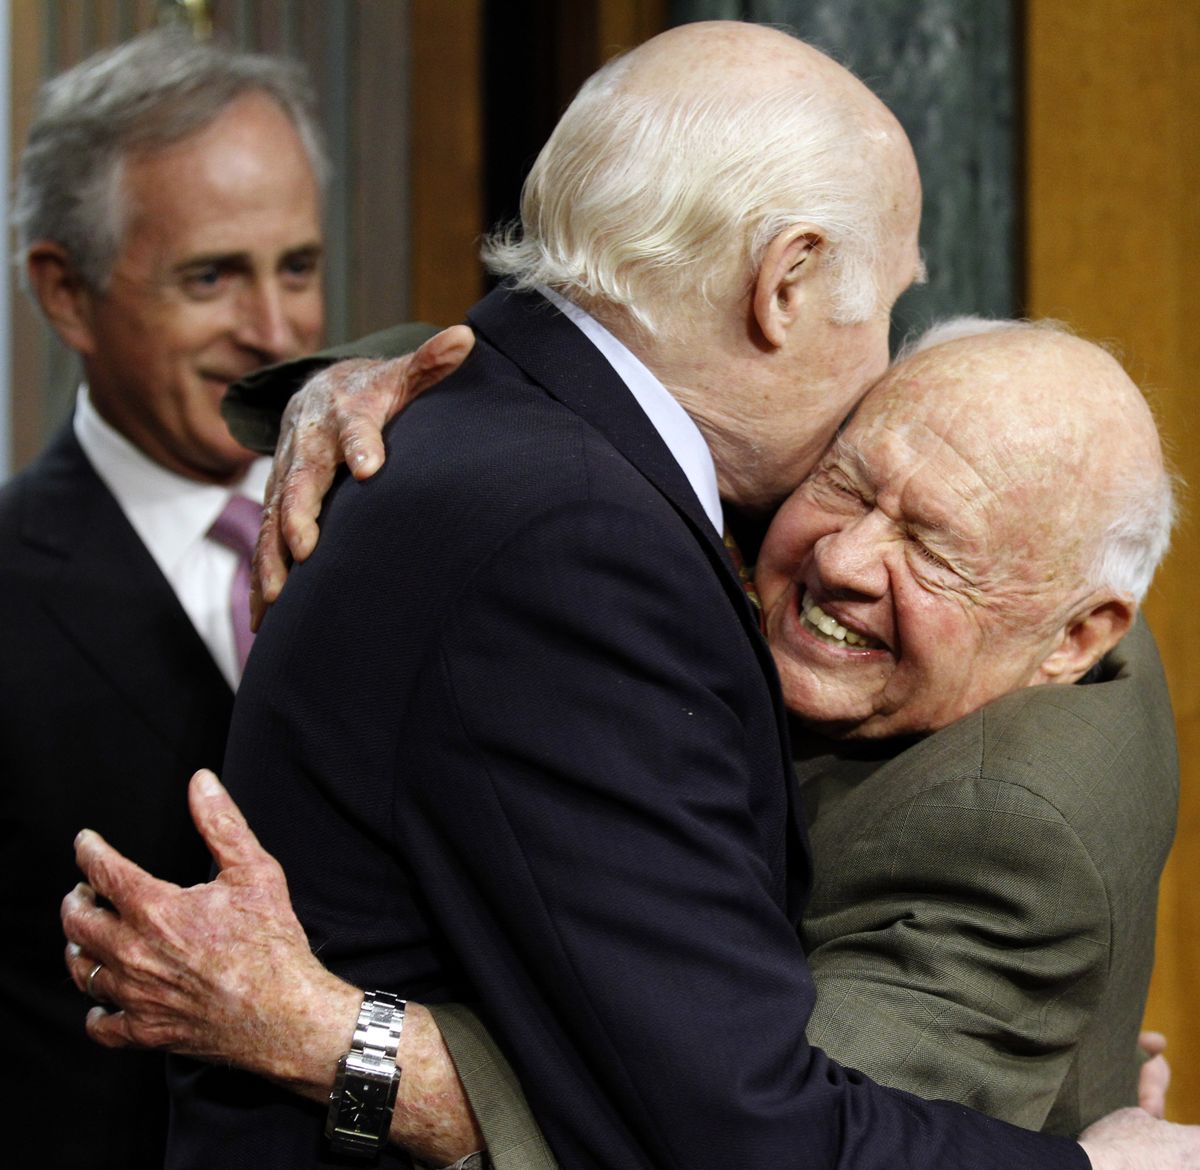 FILE - In this Wednesday, March 2, 2011, file photo, Senate Aging Committee Chairman Sen. Herb Kohl. D-Wis., center, gets a hug from entertainer Mickey Rooney, right, on Capitol Hill in Washington, as Sen. Bob Corker, R-Tenn., looks on at left, prior to Rooney testifying about elder abuse, before the committee. Rooney, a Hollywood legend whose career spanned more than 80 years, has died. He was 93. Los Angeles Police Commander Andrew Smith said that Rooney was with his family when he died Sunday, April 6, 2014, at his North Hollywood home. (Alex Brandon / Associated Press)